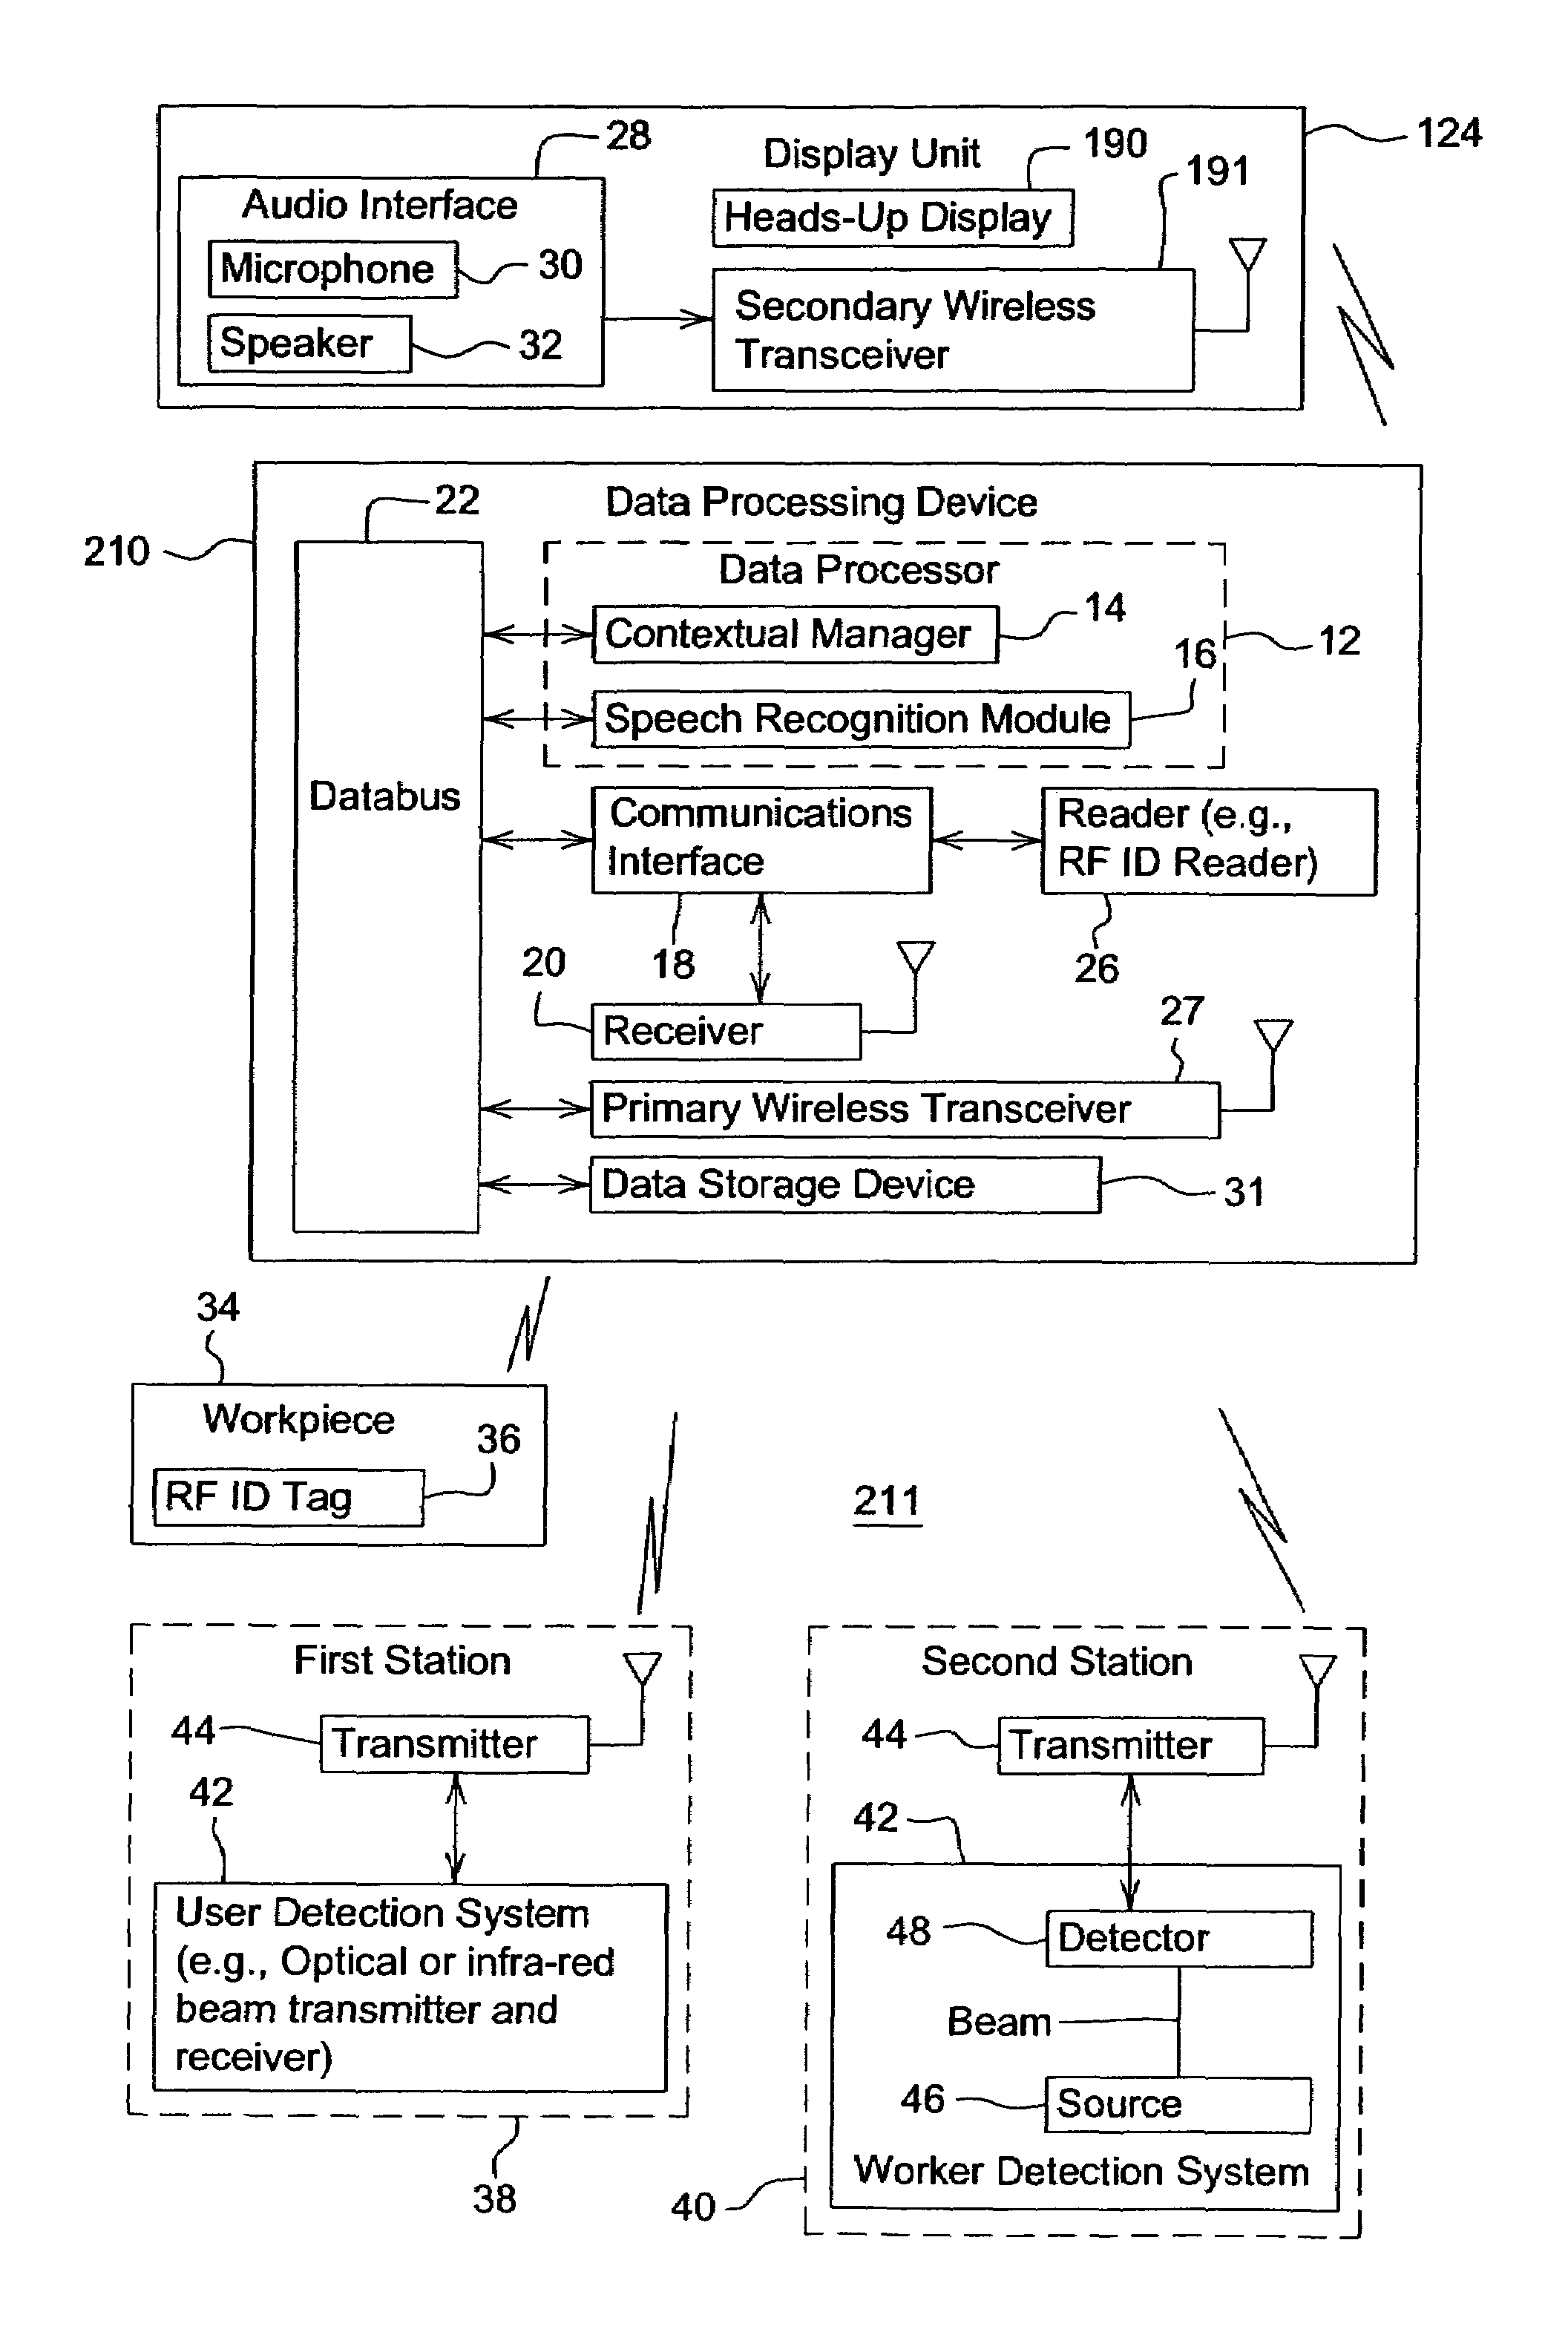 Method and system for delivering information to a user